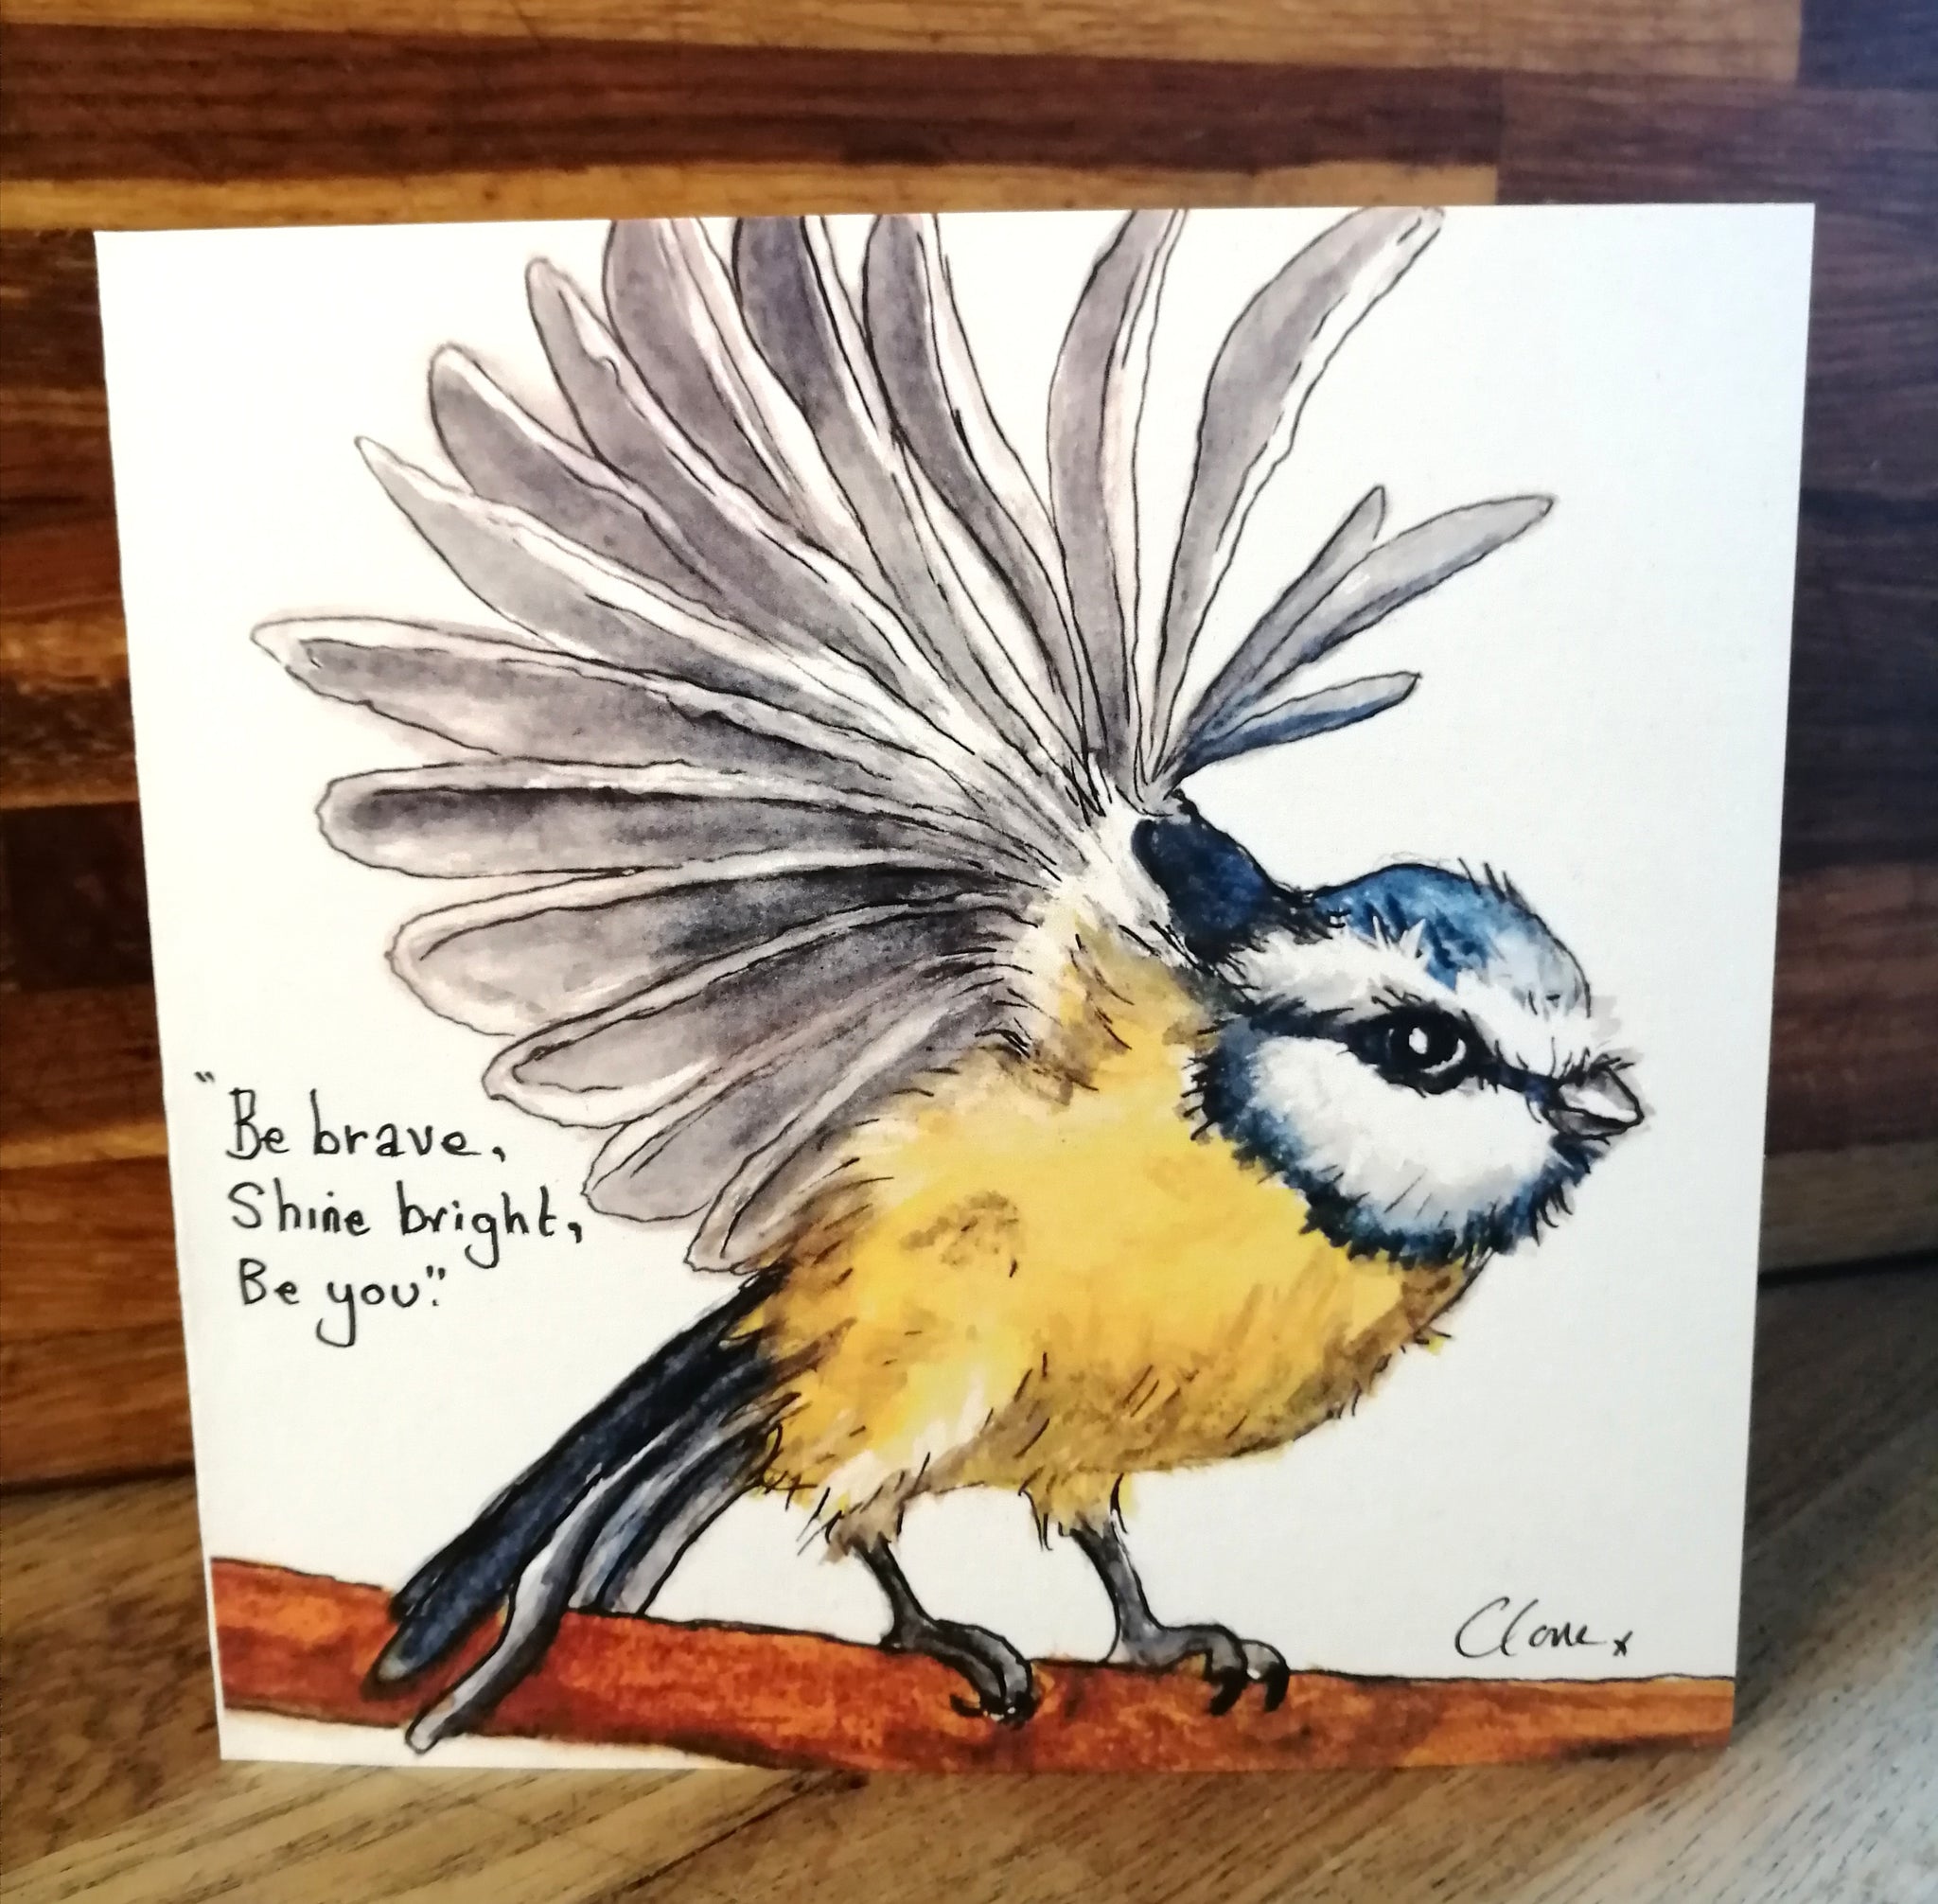 Billy. The blue tit. Be brave, shine bright, be you.